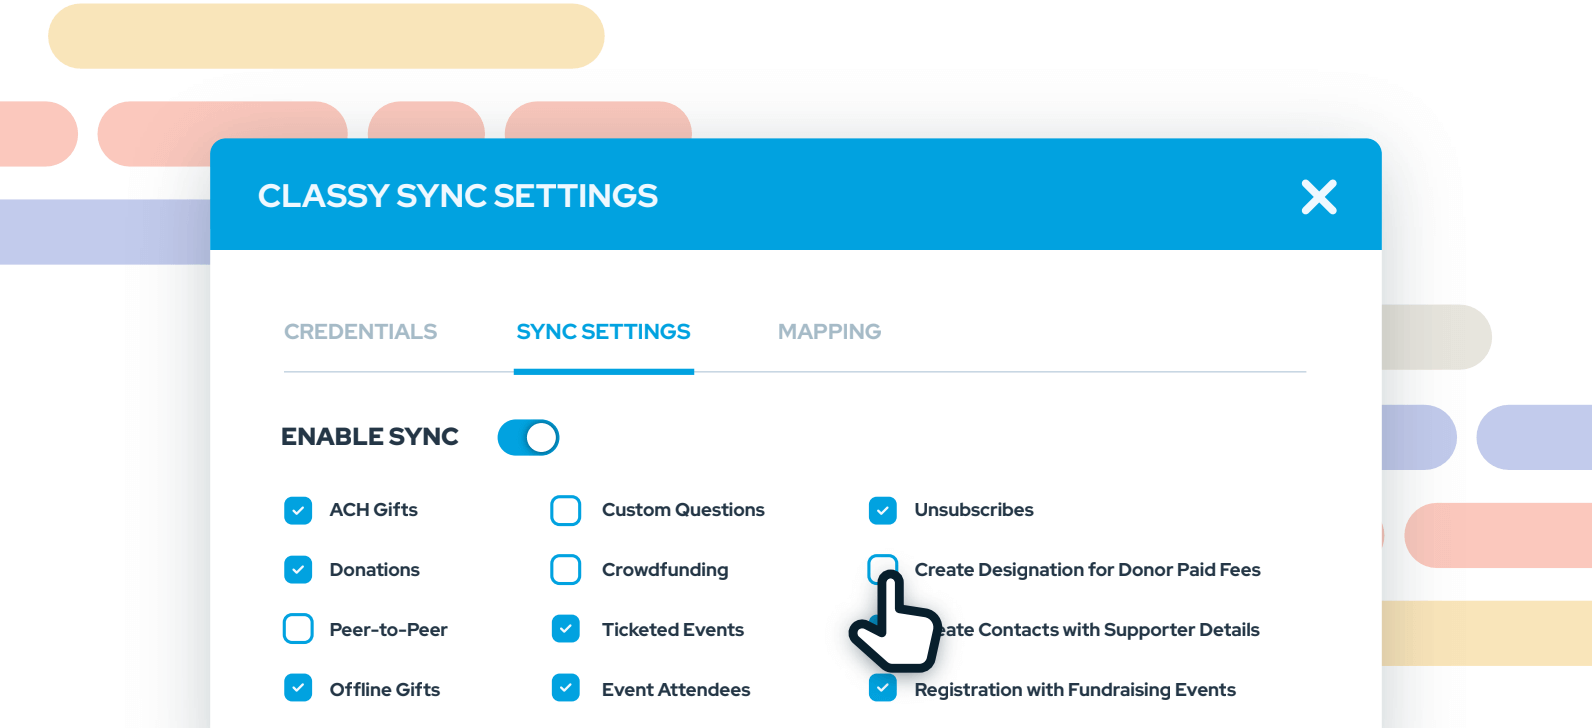 Virtuous-Classy-Sync-Settings-Graphic